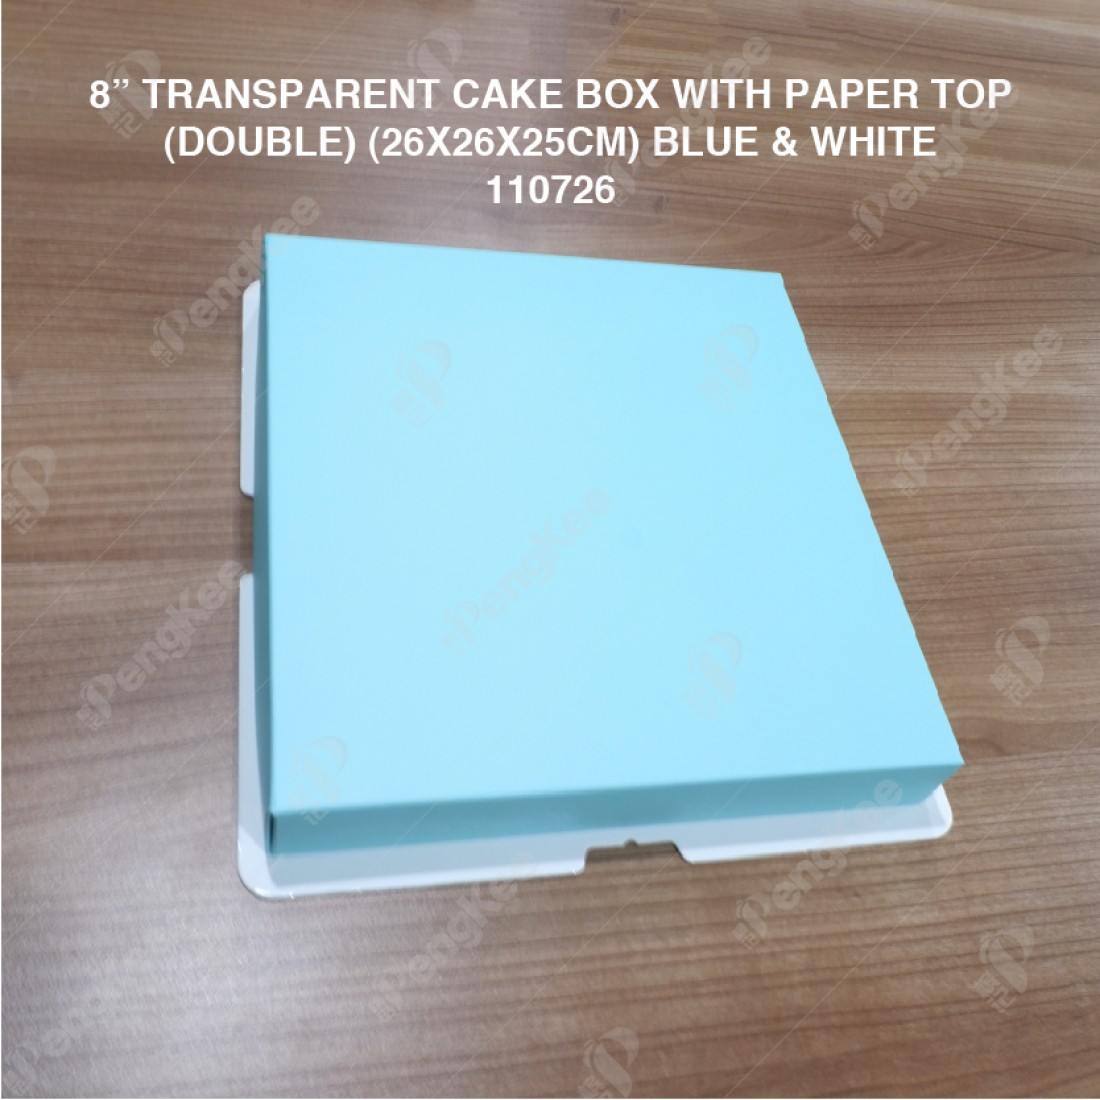 8" TRANSPARENT CAKE BOX WITH PAPER TOP(DOUBLE) (26*26*25CM)- BLUE & WHITE